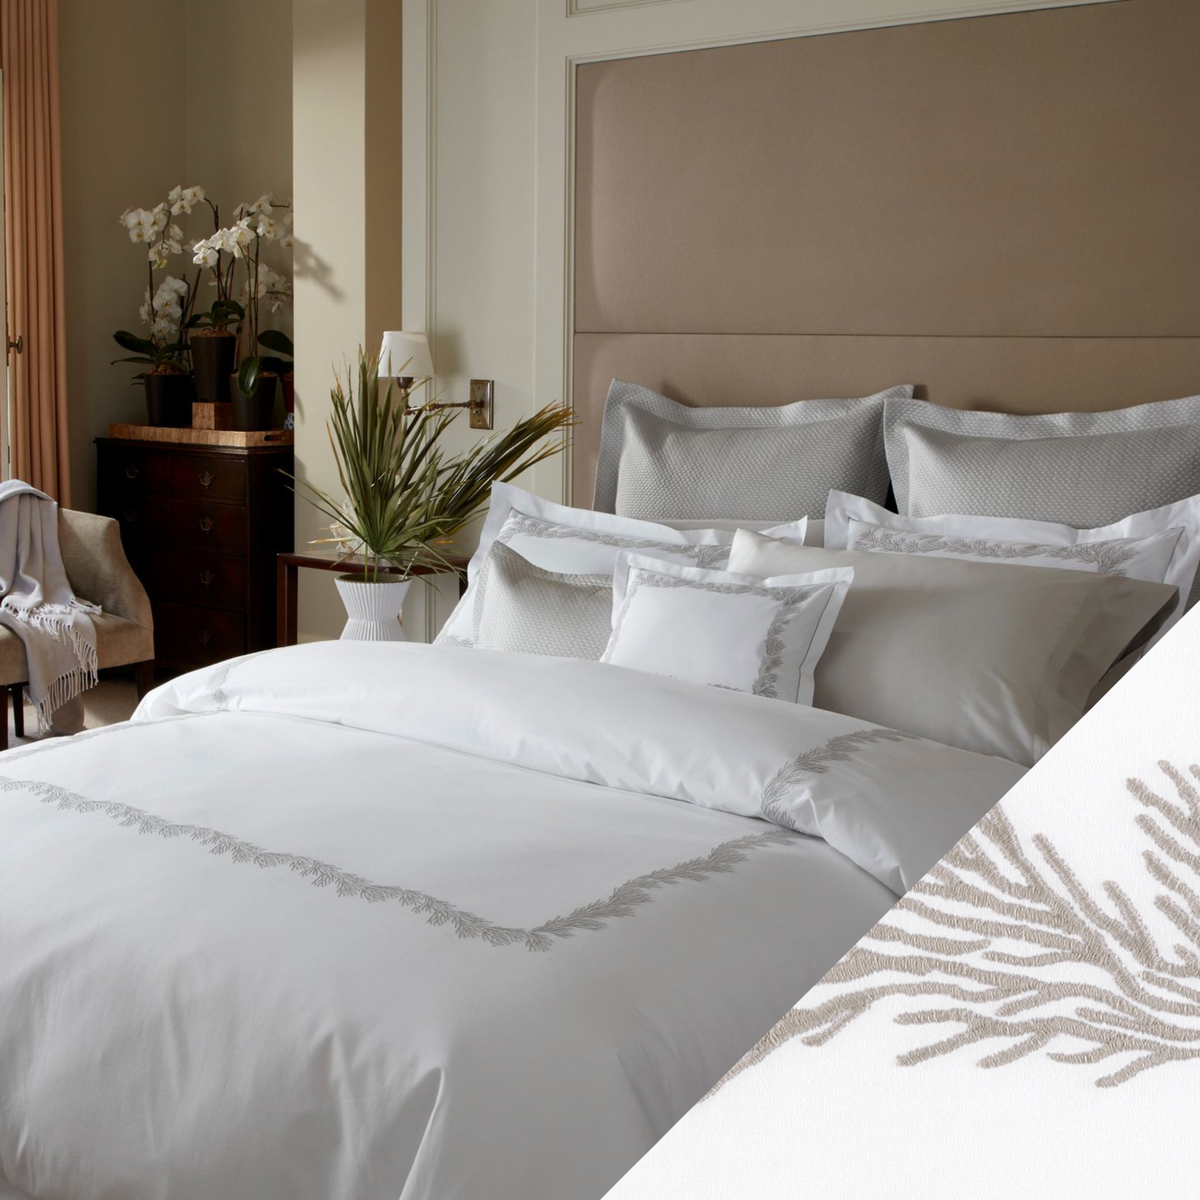 Full Lifestyle Image of Matouk Atoll Bedding Collection Alabaster